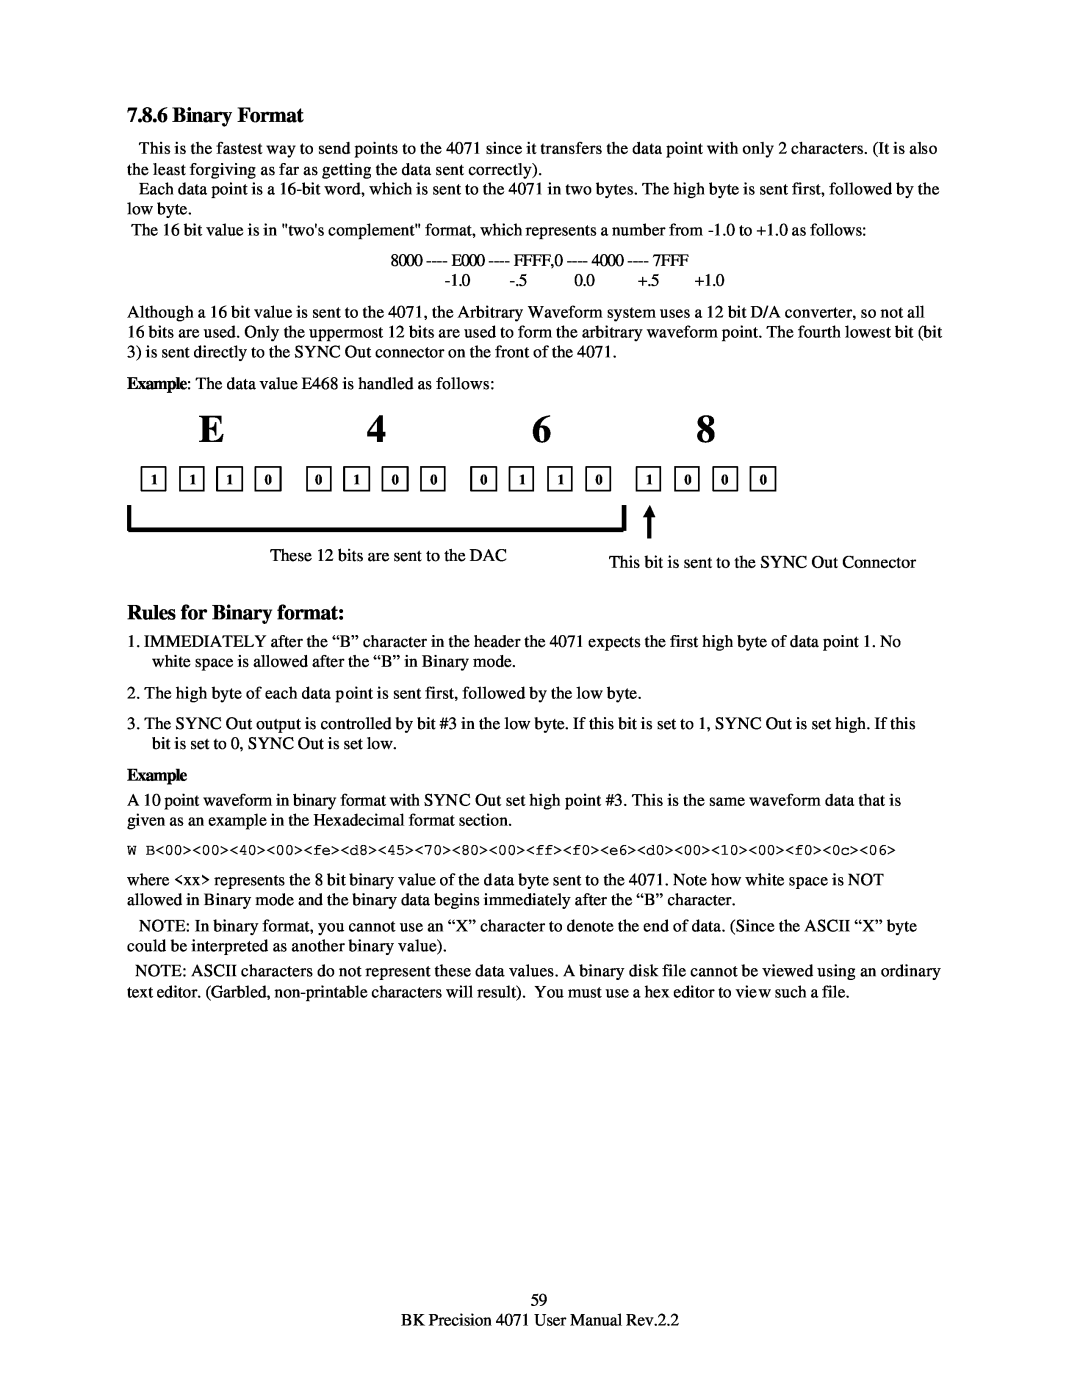 B&K 4071 user manual Binary Format, Rules for Binary format, Example 